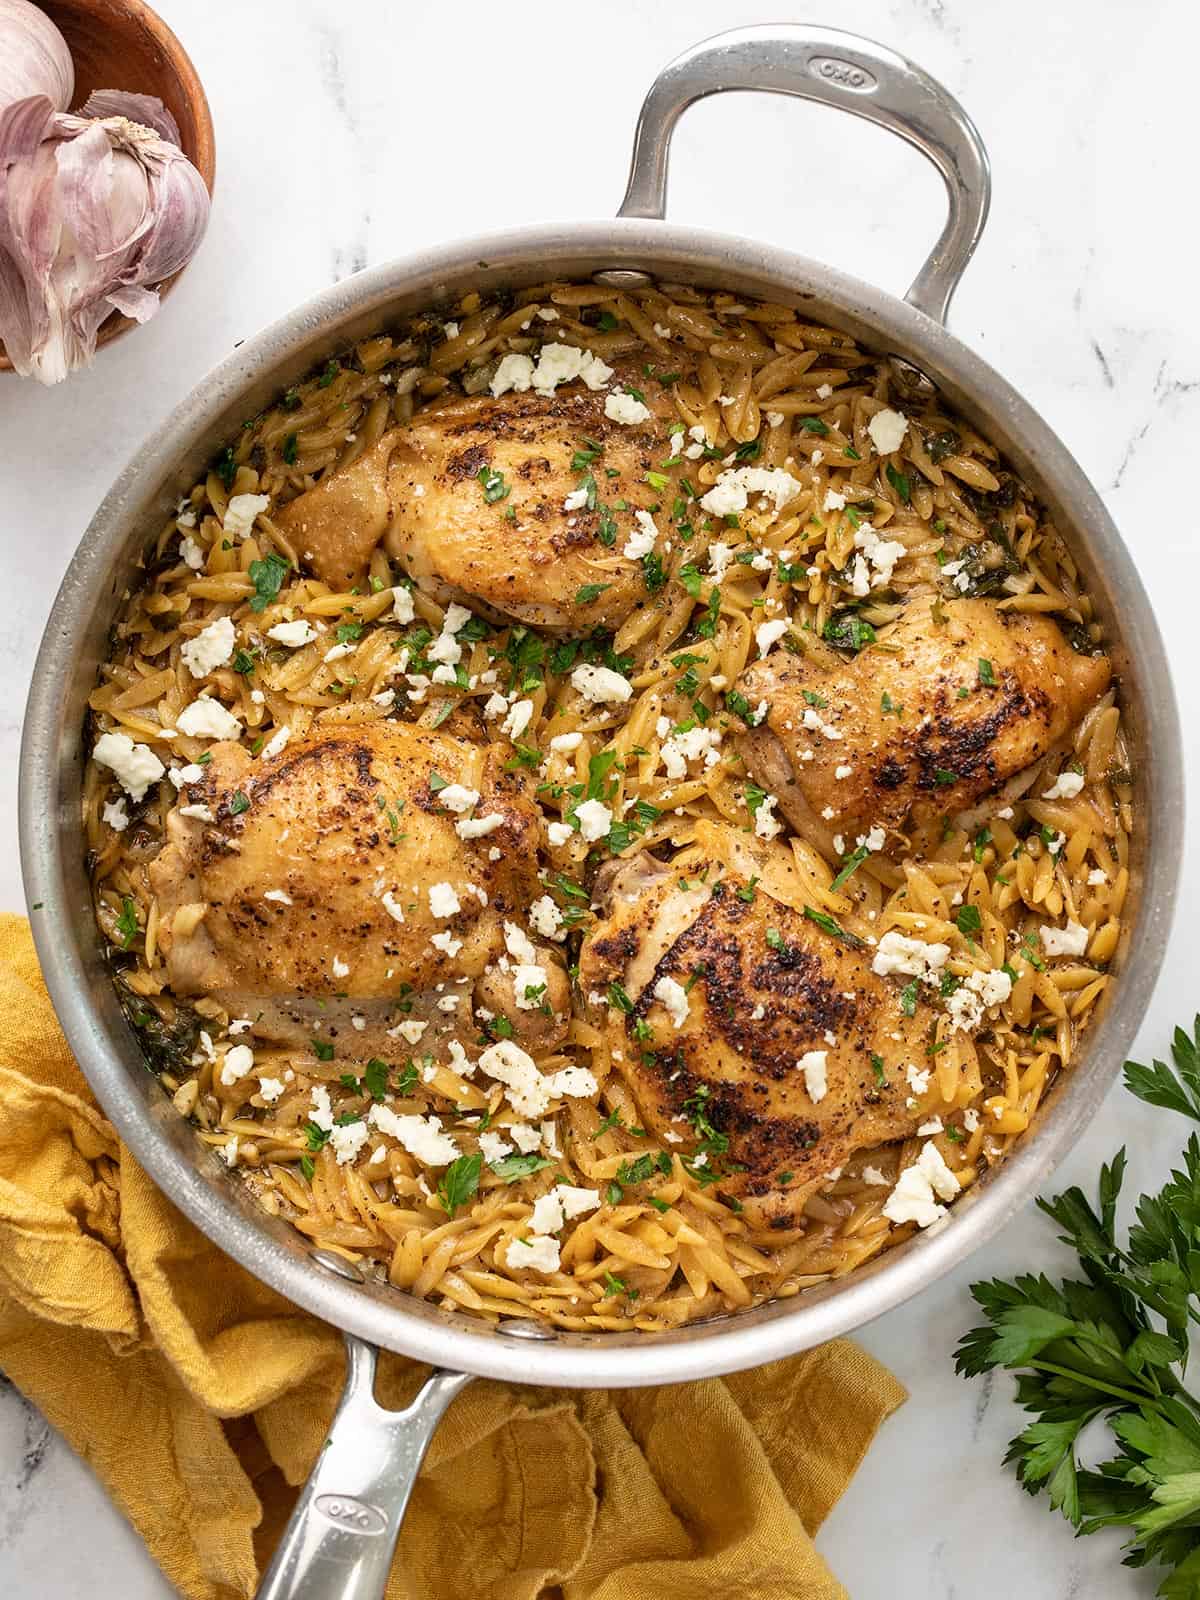 Overhead view of lemon pepper chicken and orzo in the skillet with a napkin and parsley on the sides.